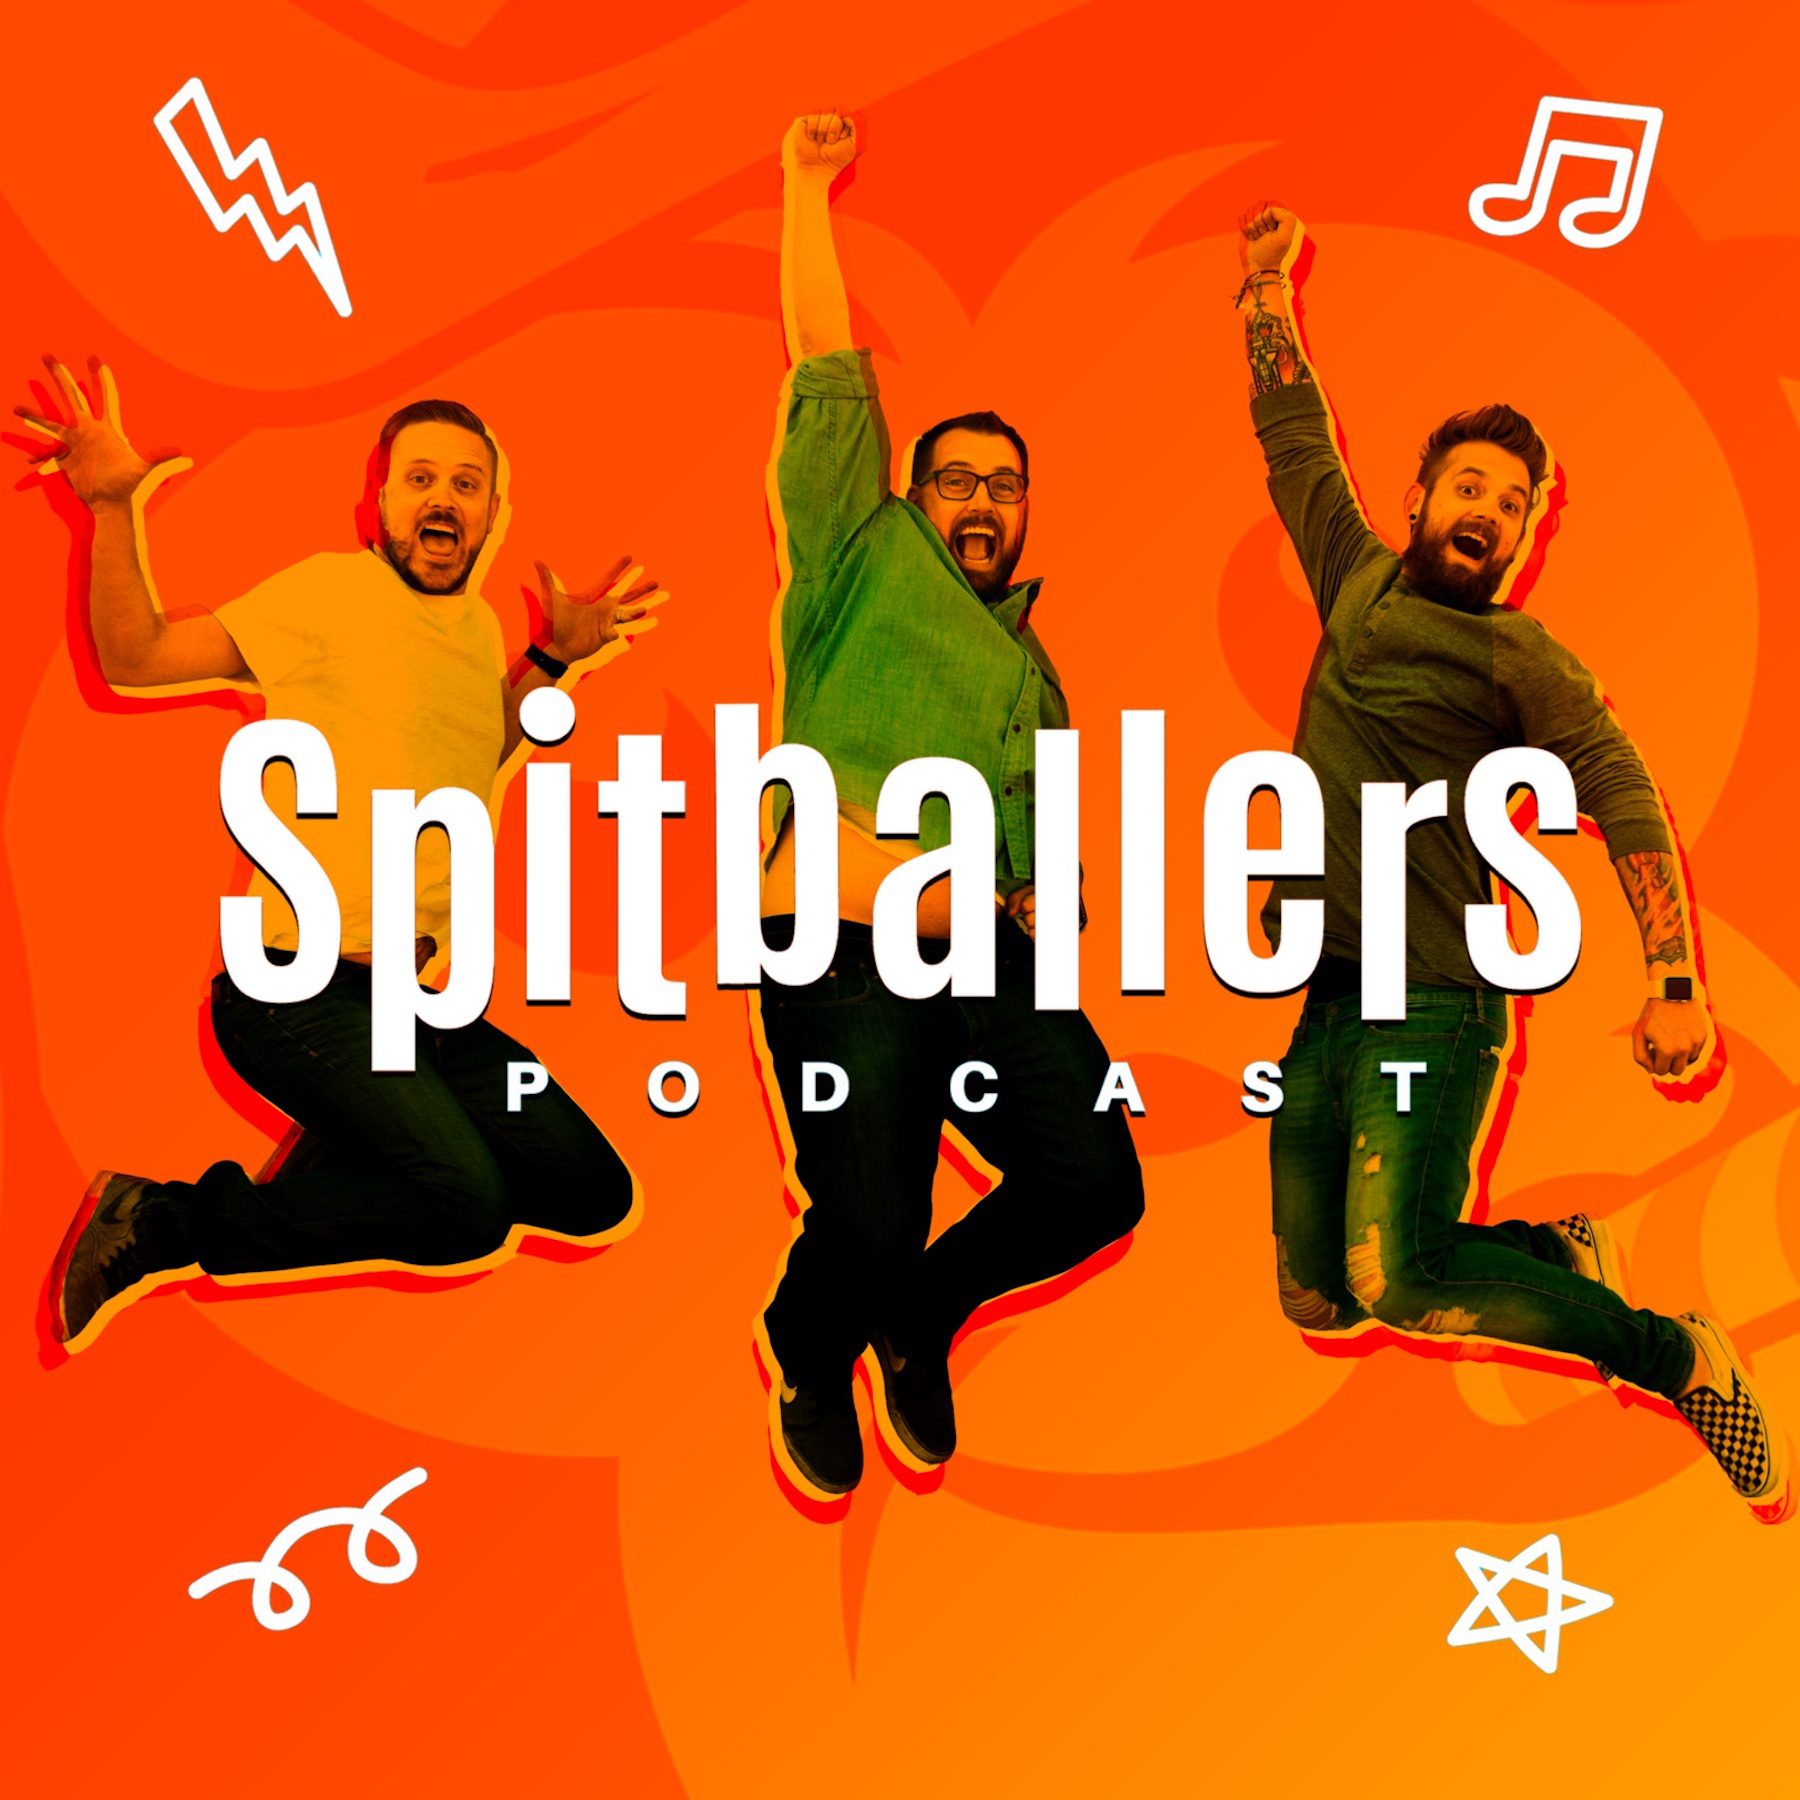 Spitballers Comedy Podcast cover, three hosts, all male, leaping into air against bright tangerine orange background.